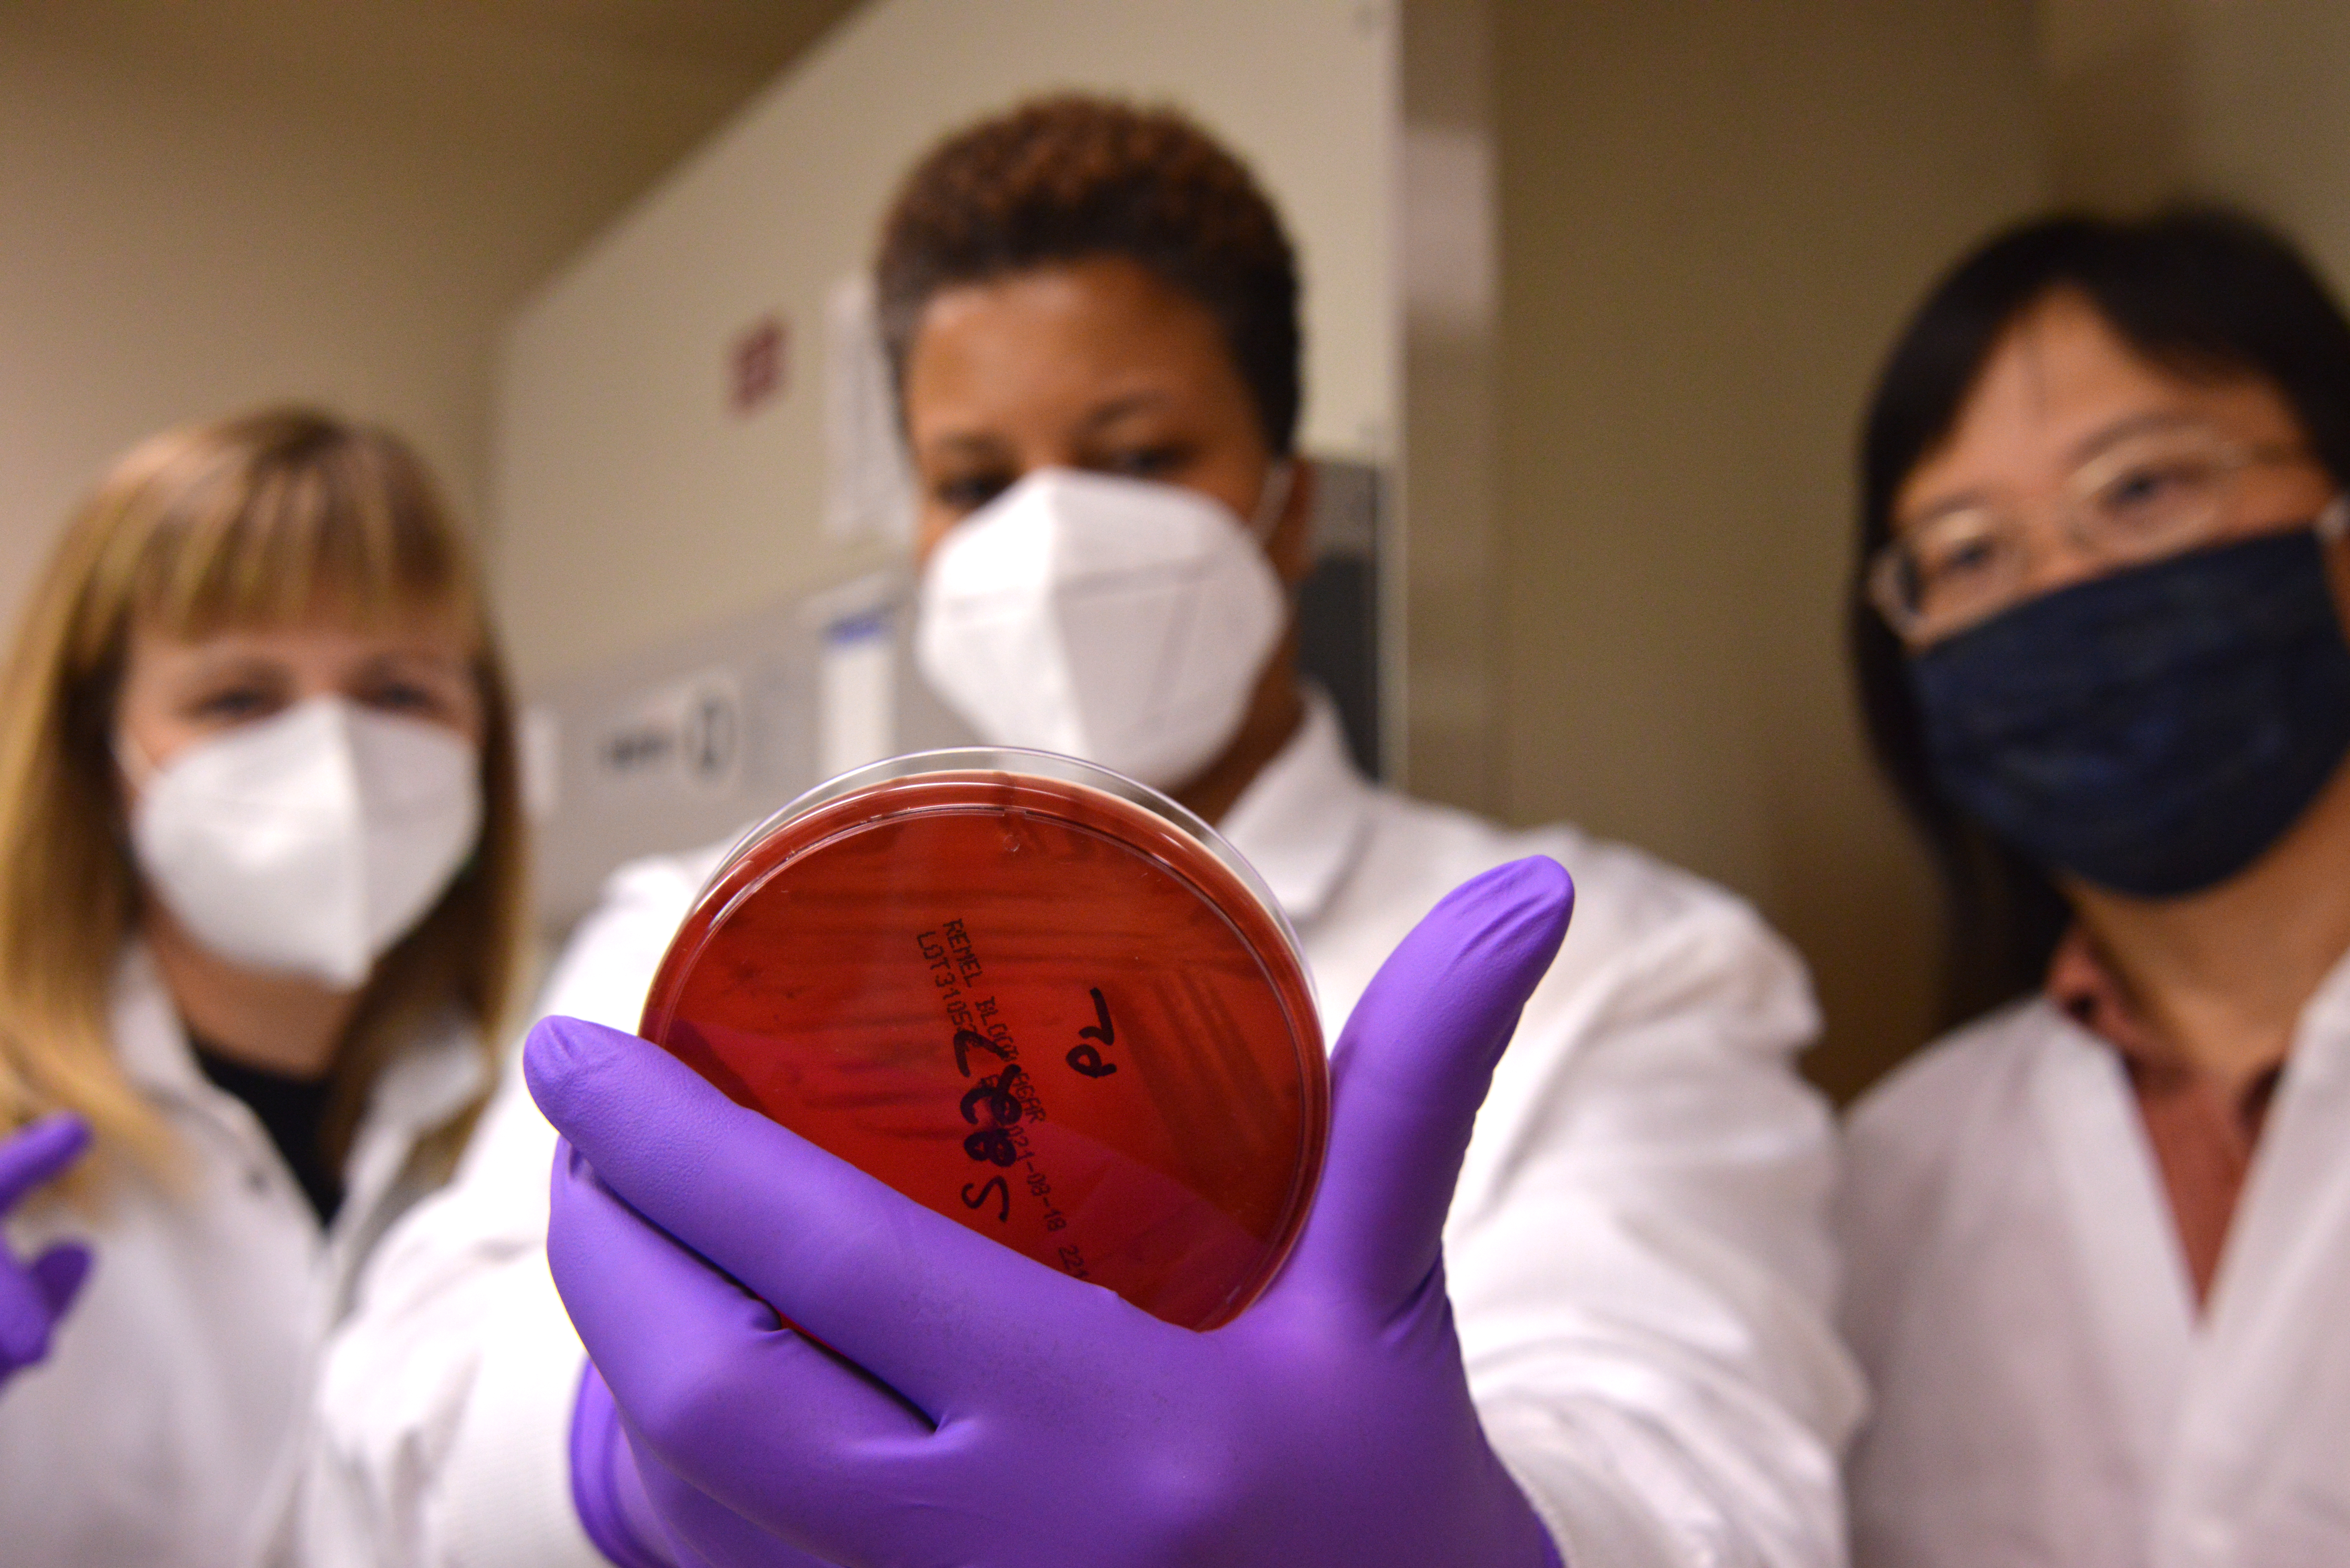 Three scientists in lab coats look at a bacterial plate.